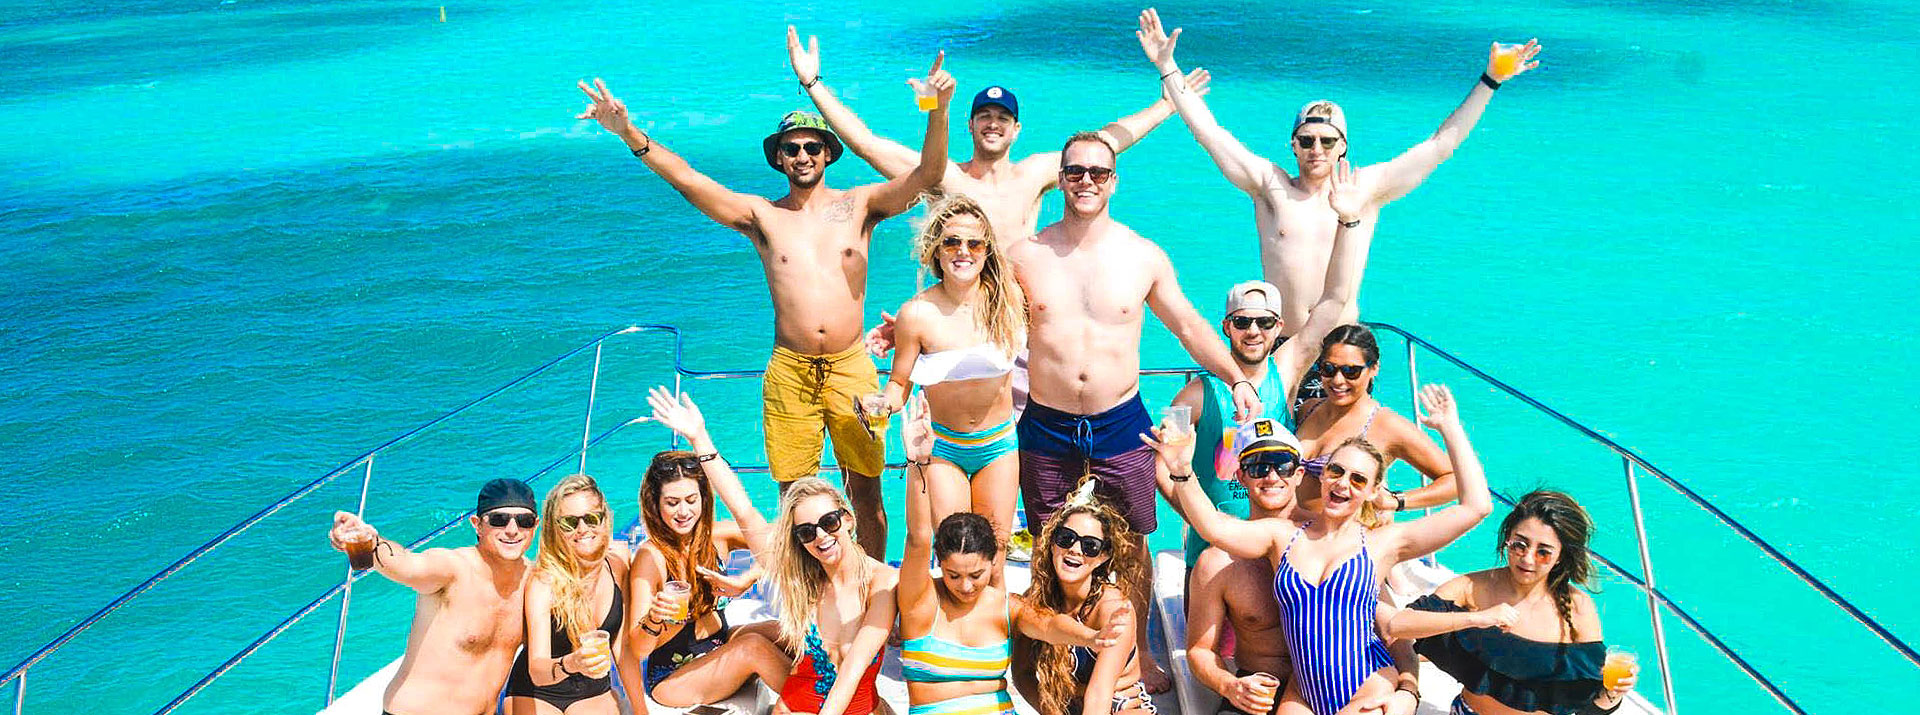 Why Should You Have Your Graduation Celebration On A Party Boat in Miami?